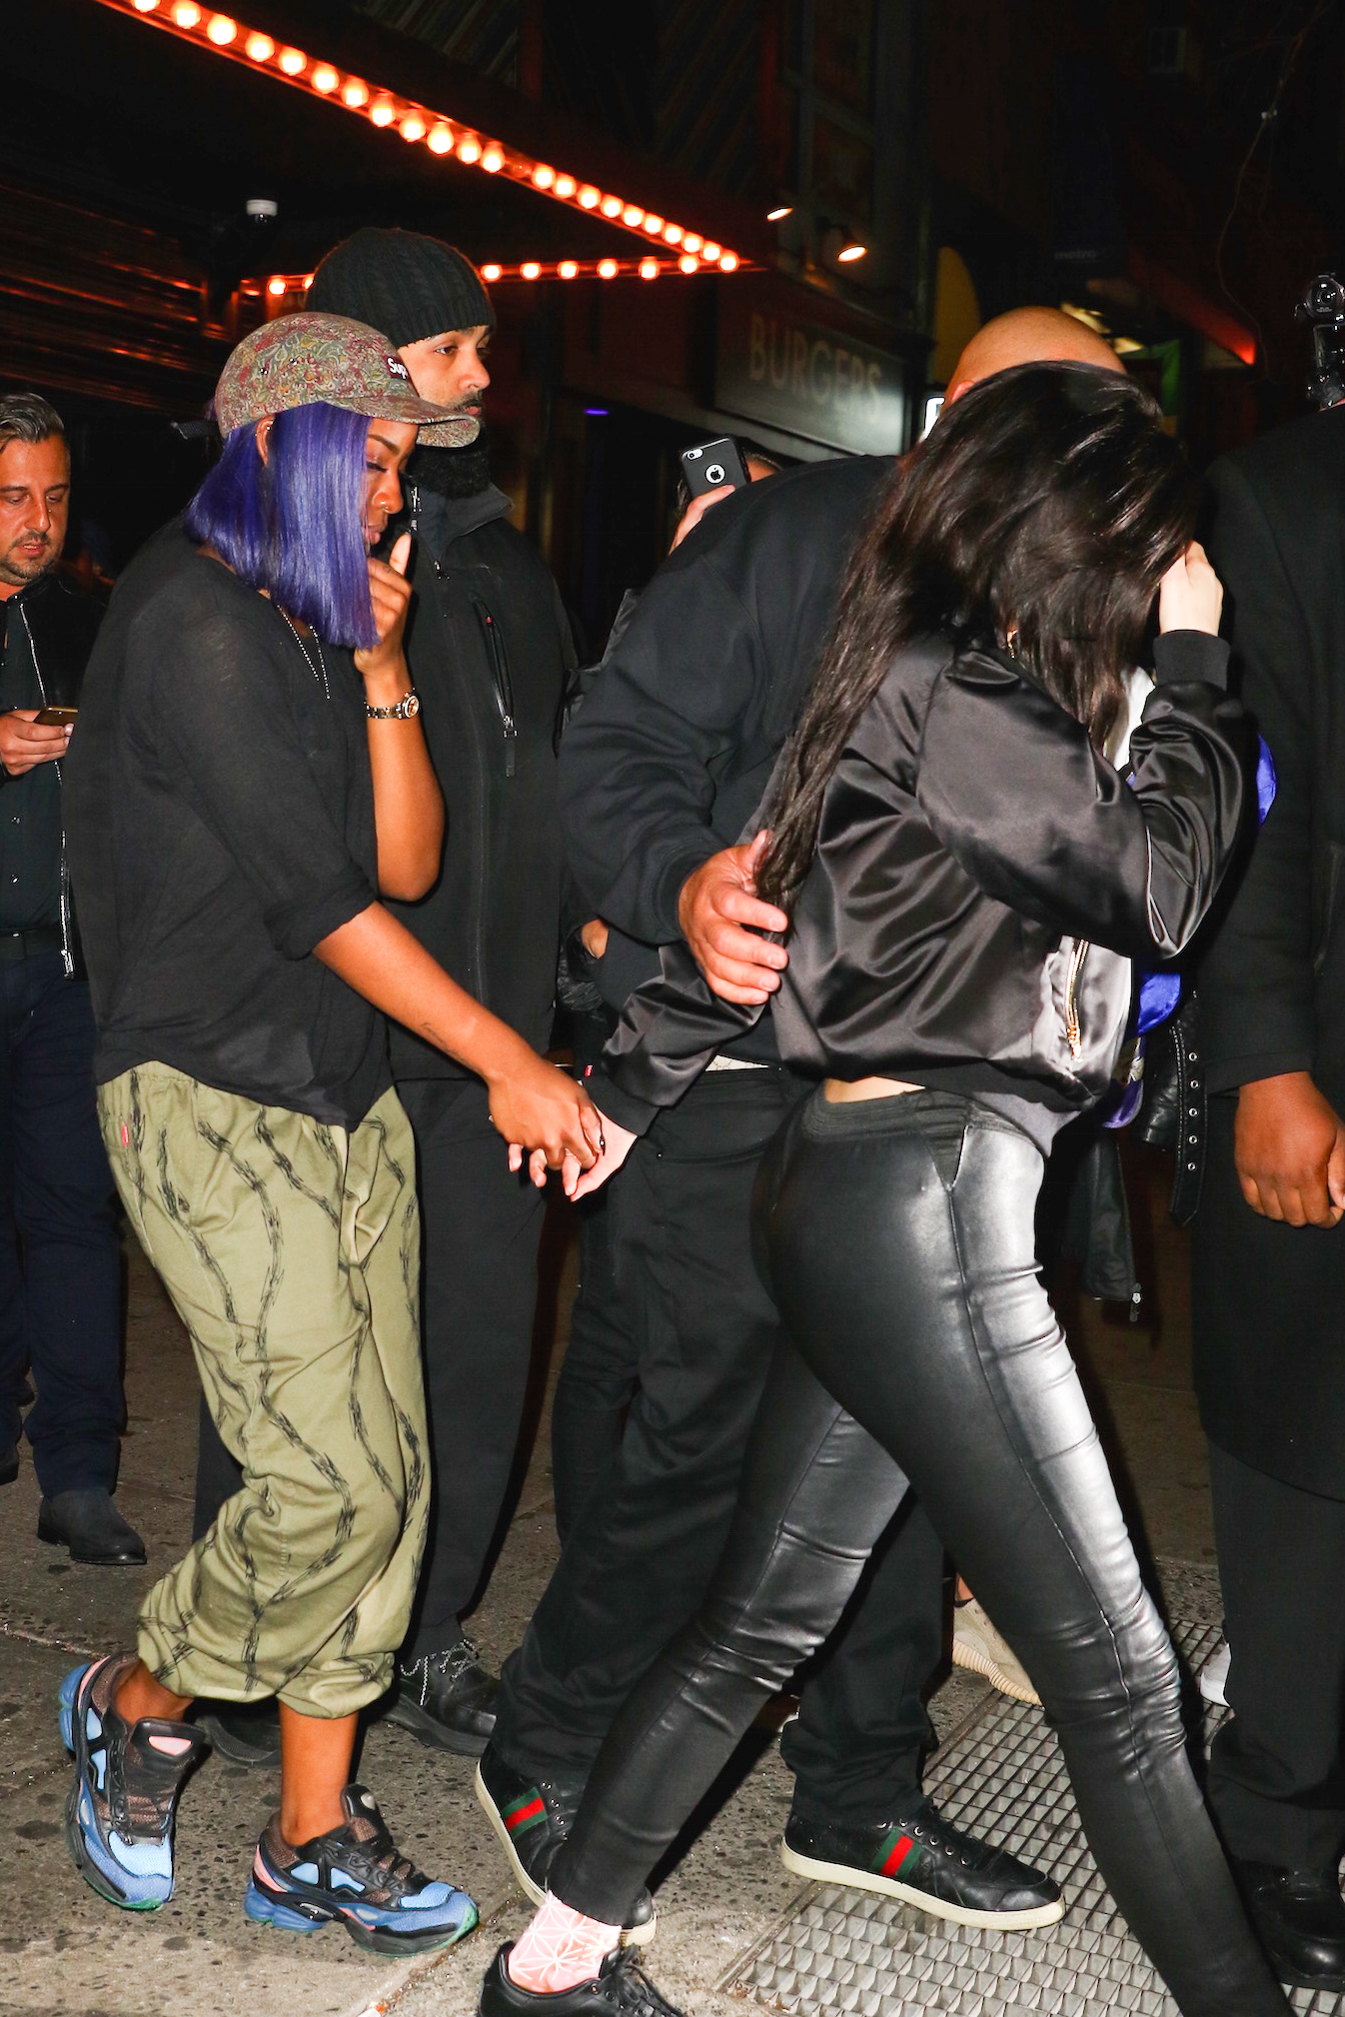 Kylie Jenner out in NYC